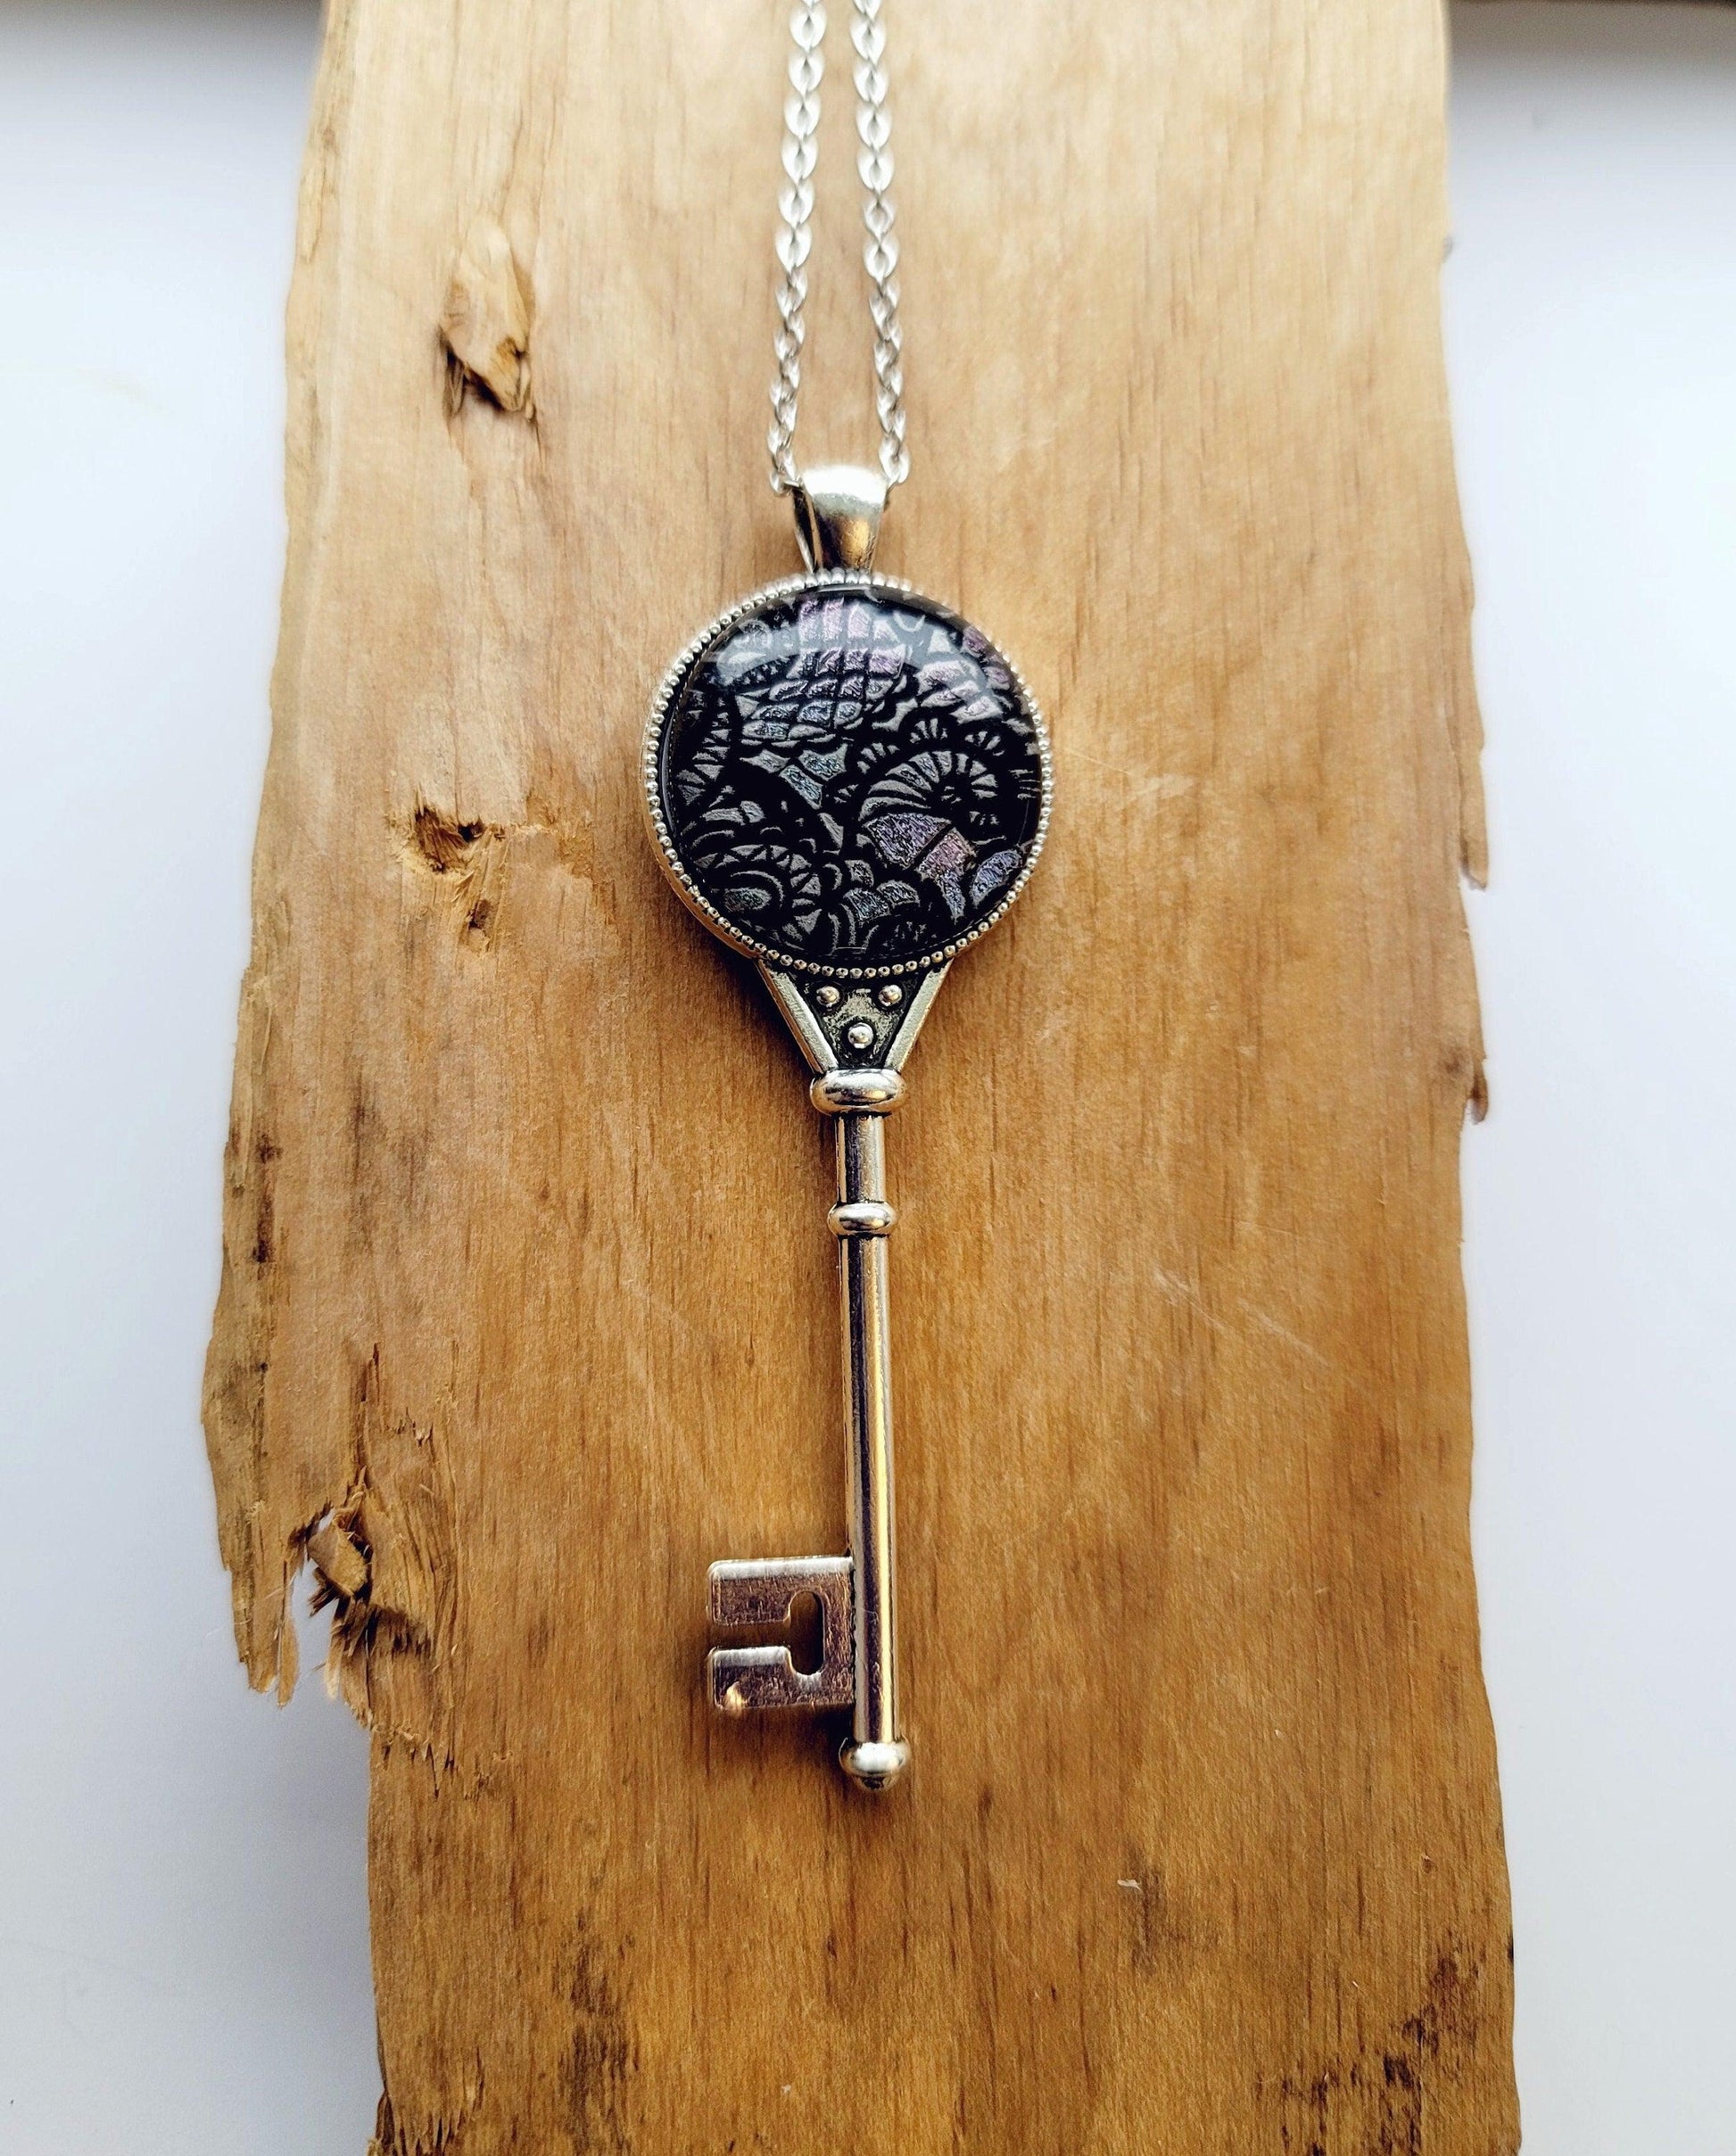 Silver tone Skeleton Key pendant necklace with Fused Glass dark Silver Lace cabochon on 24 inch steel chain jewelry seedsglassworks seeds glassworks